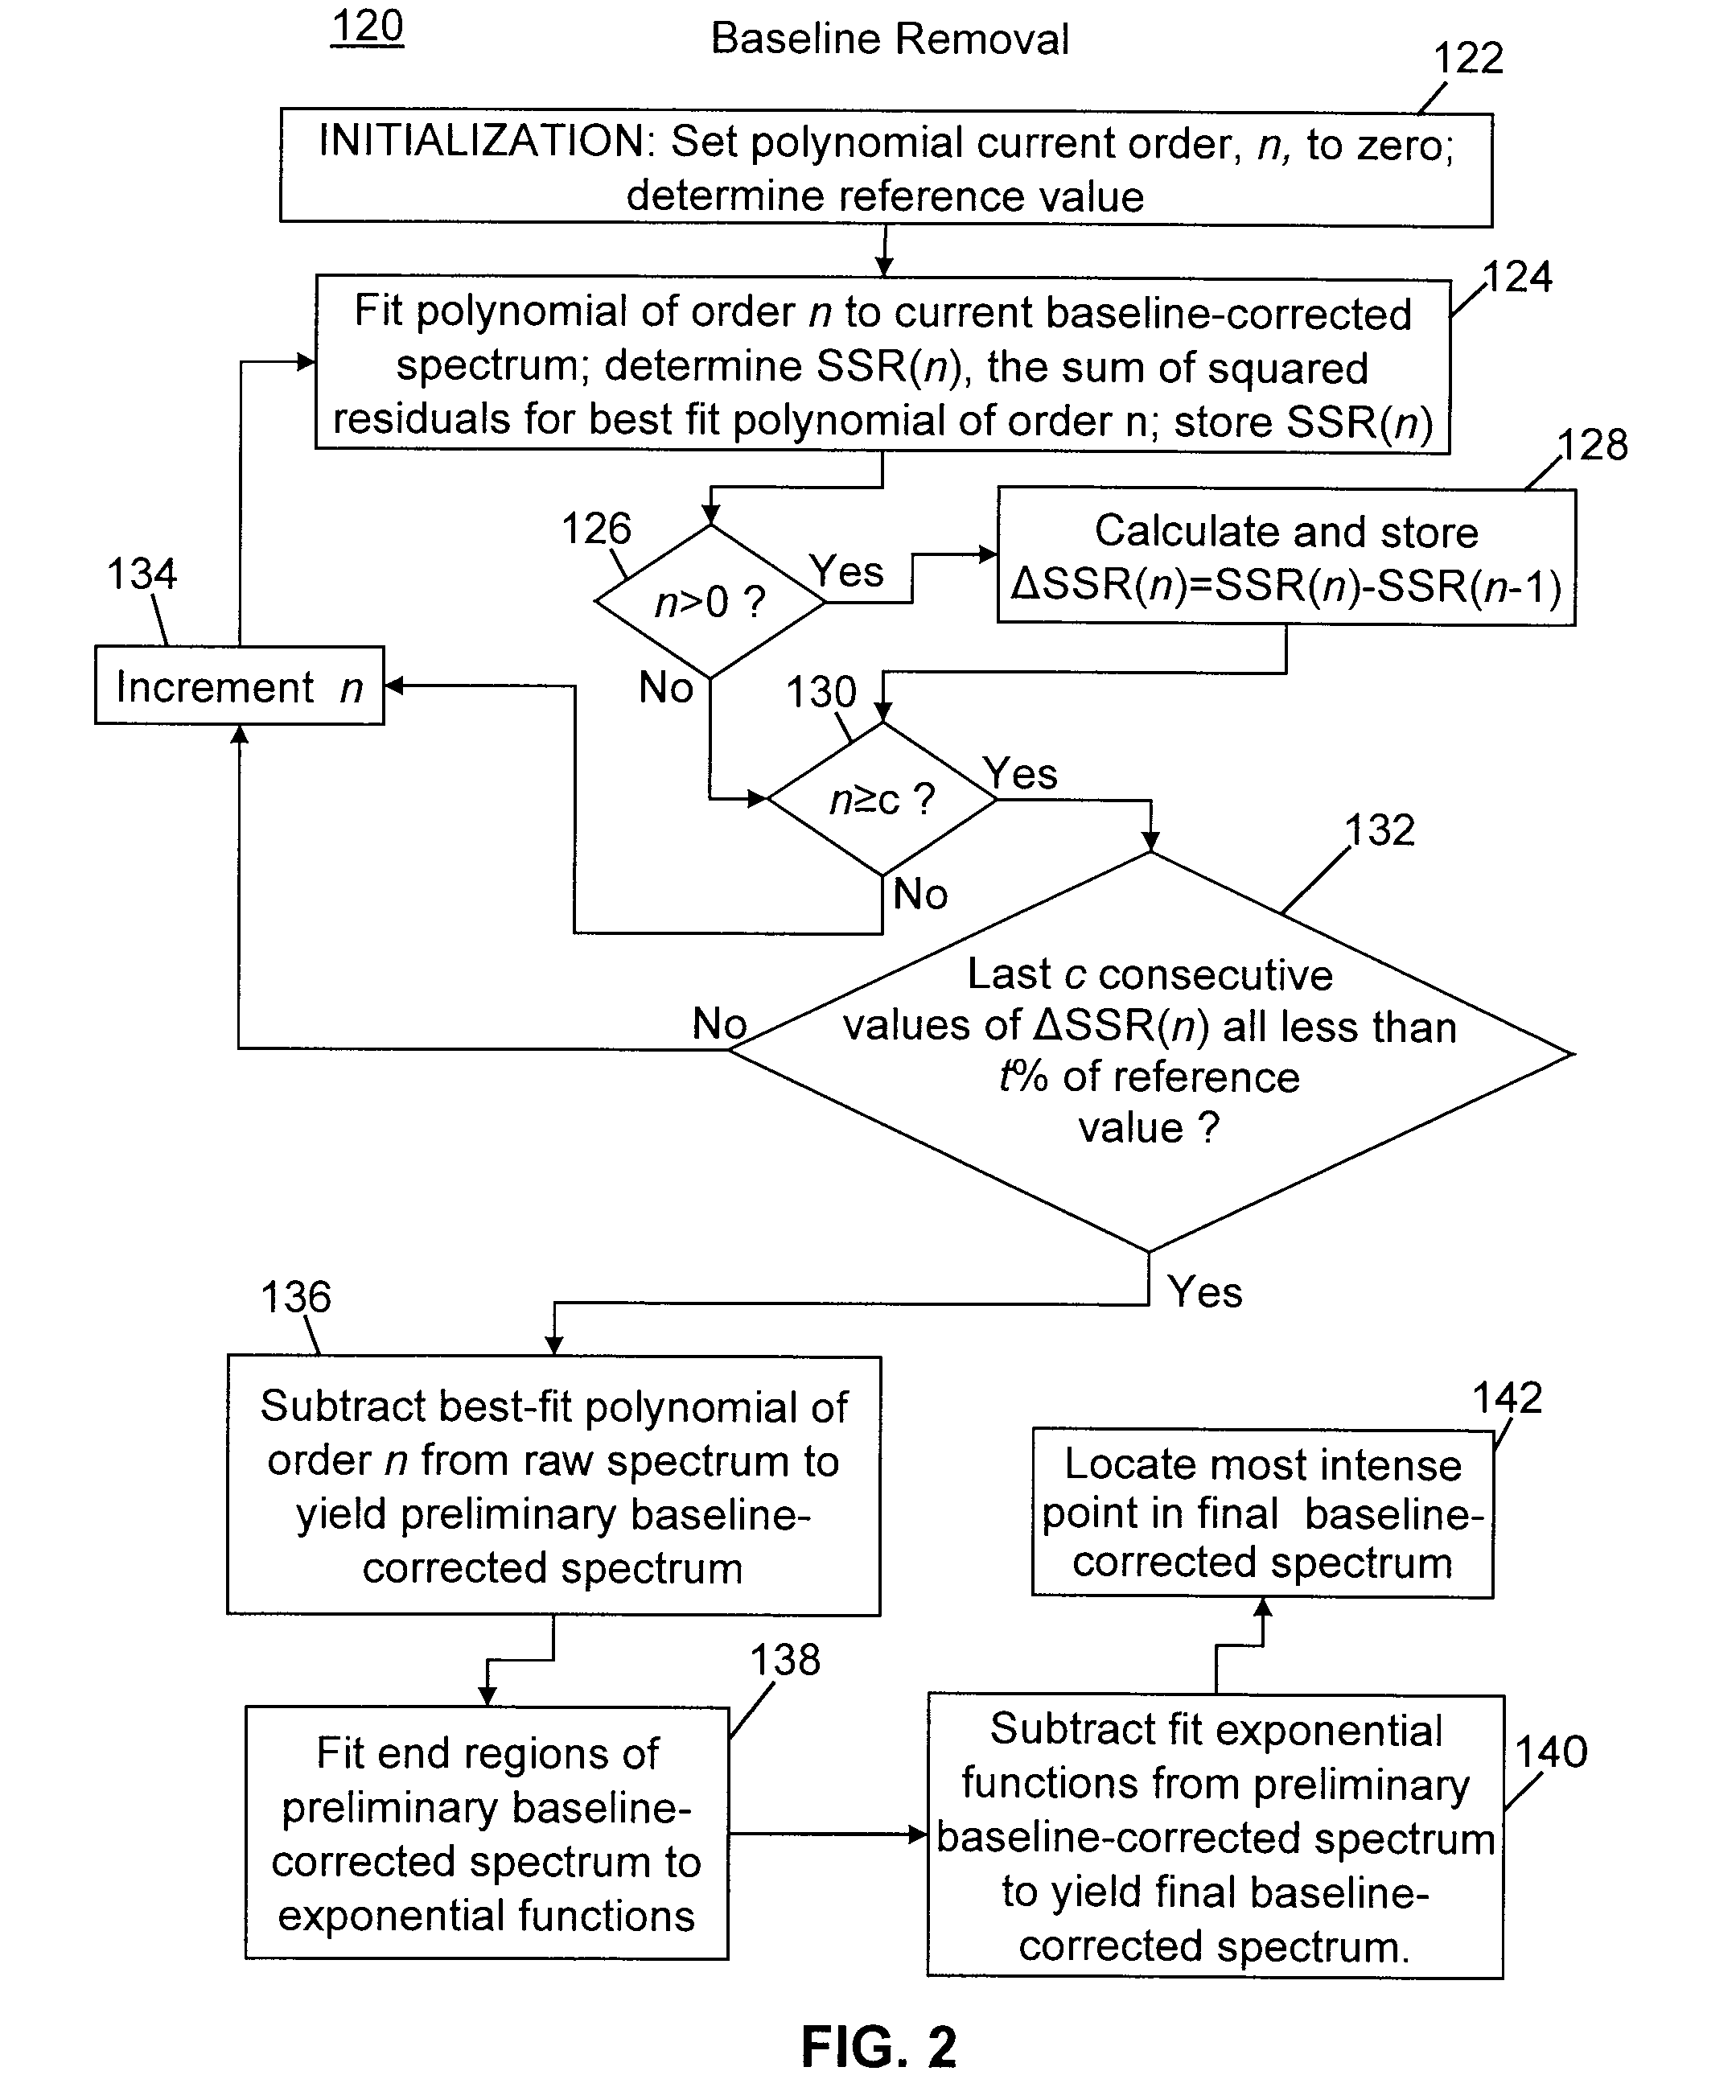 Methods of Automated Spectral Peak Detection and Quantification Having Learning Mode